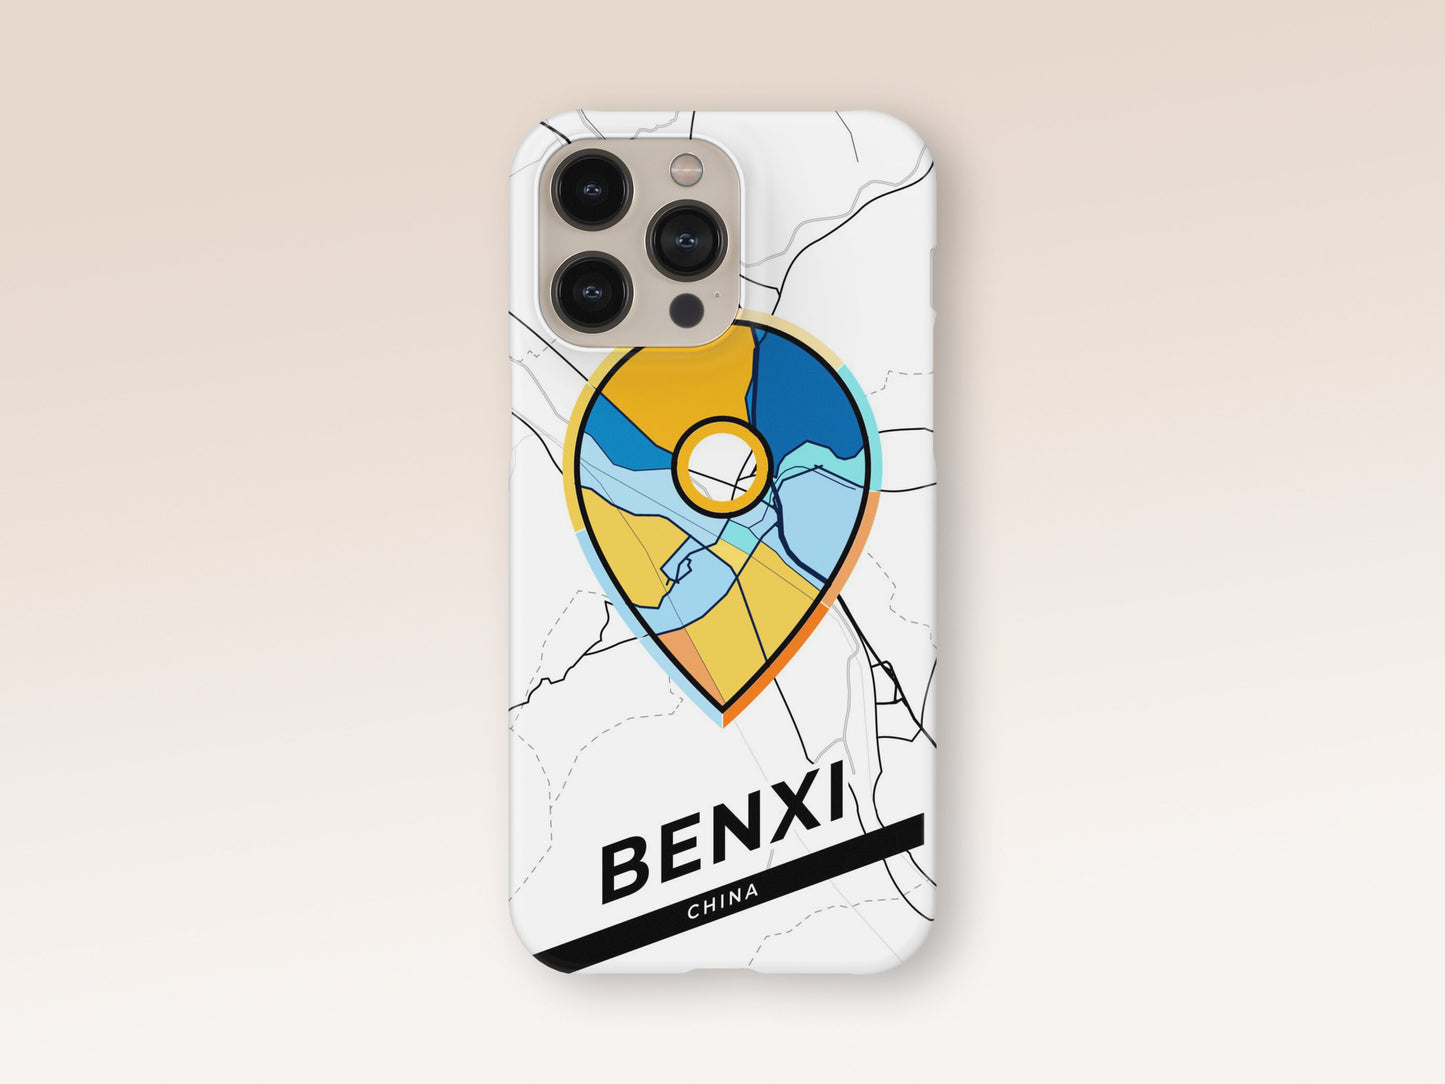 Benxi China slim phone case with colorful icon. Birthday, wedding or housewarming gift. Couple match cases. 1